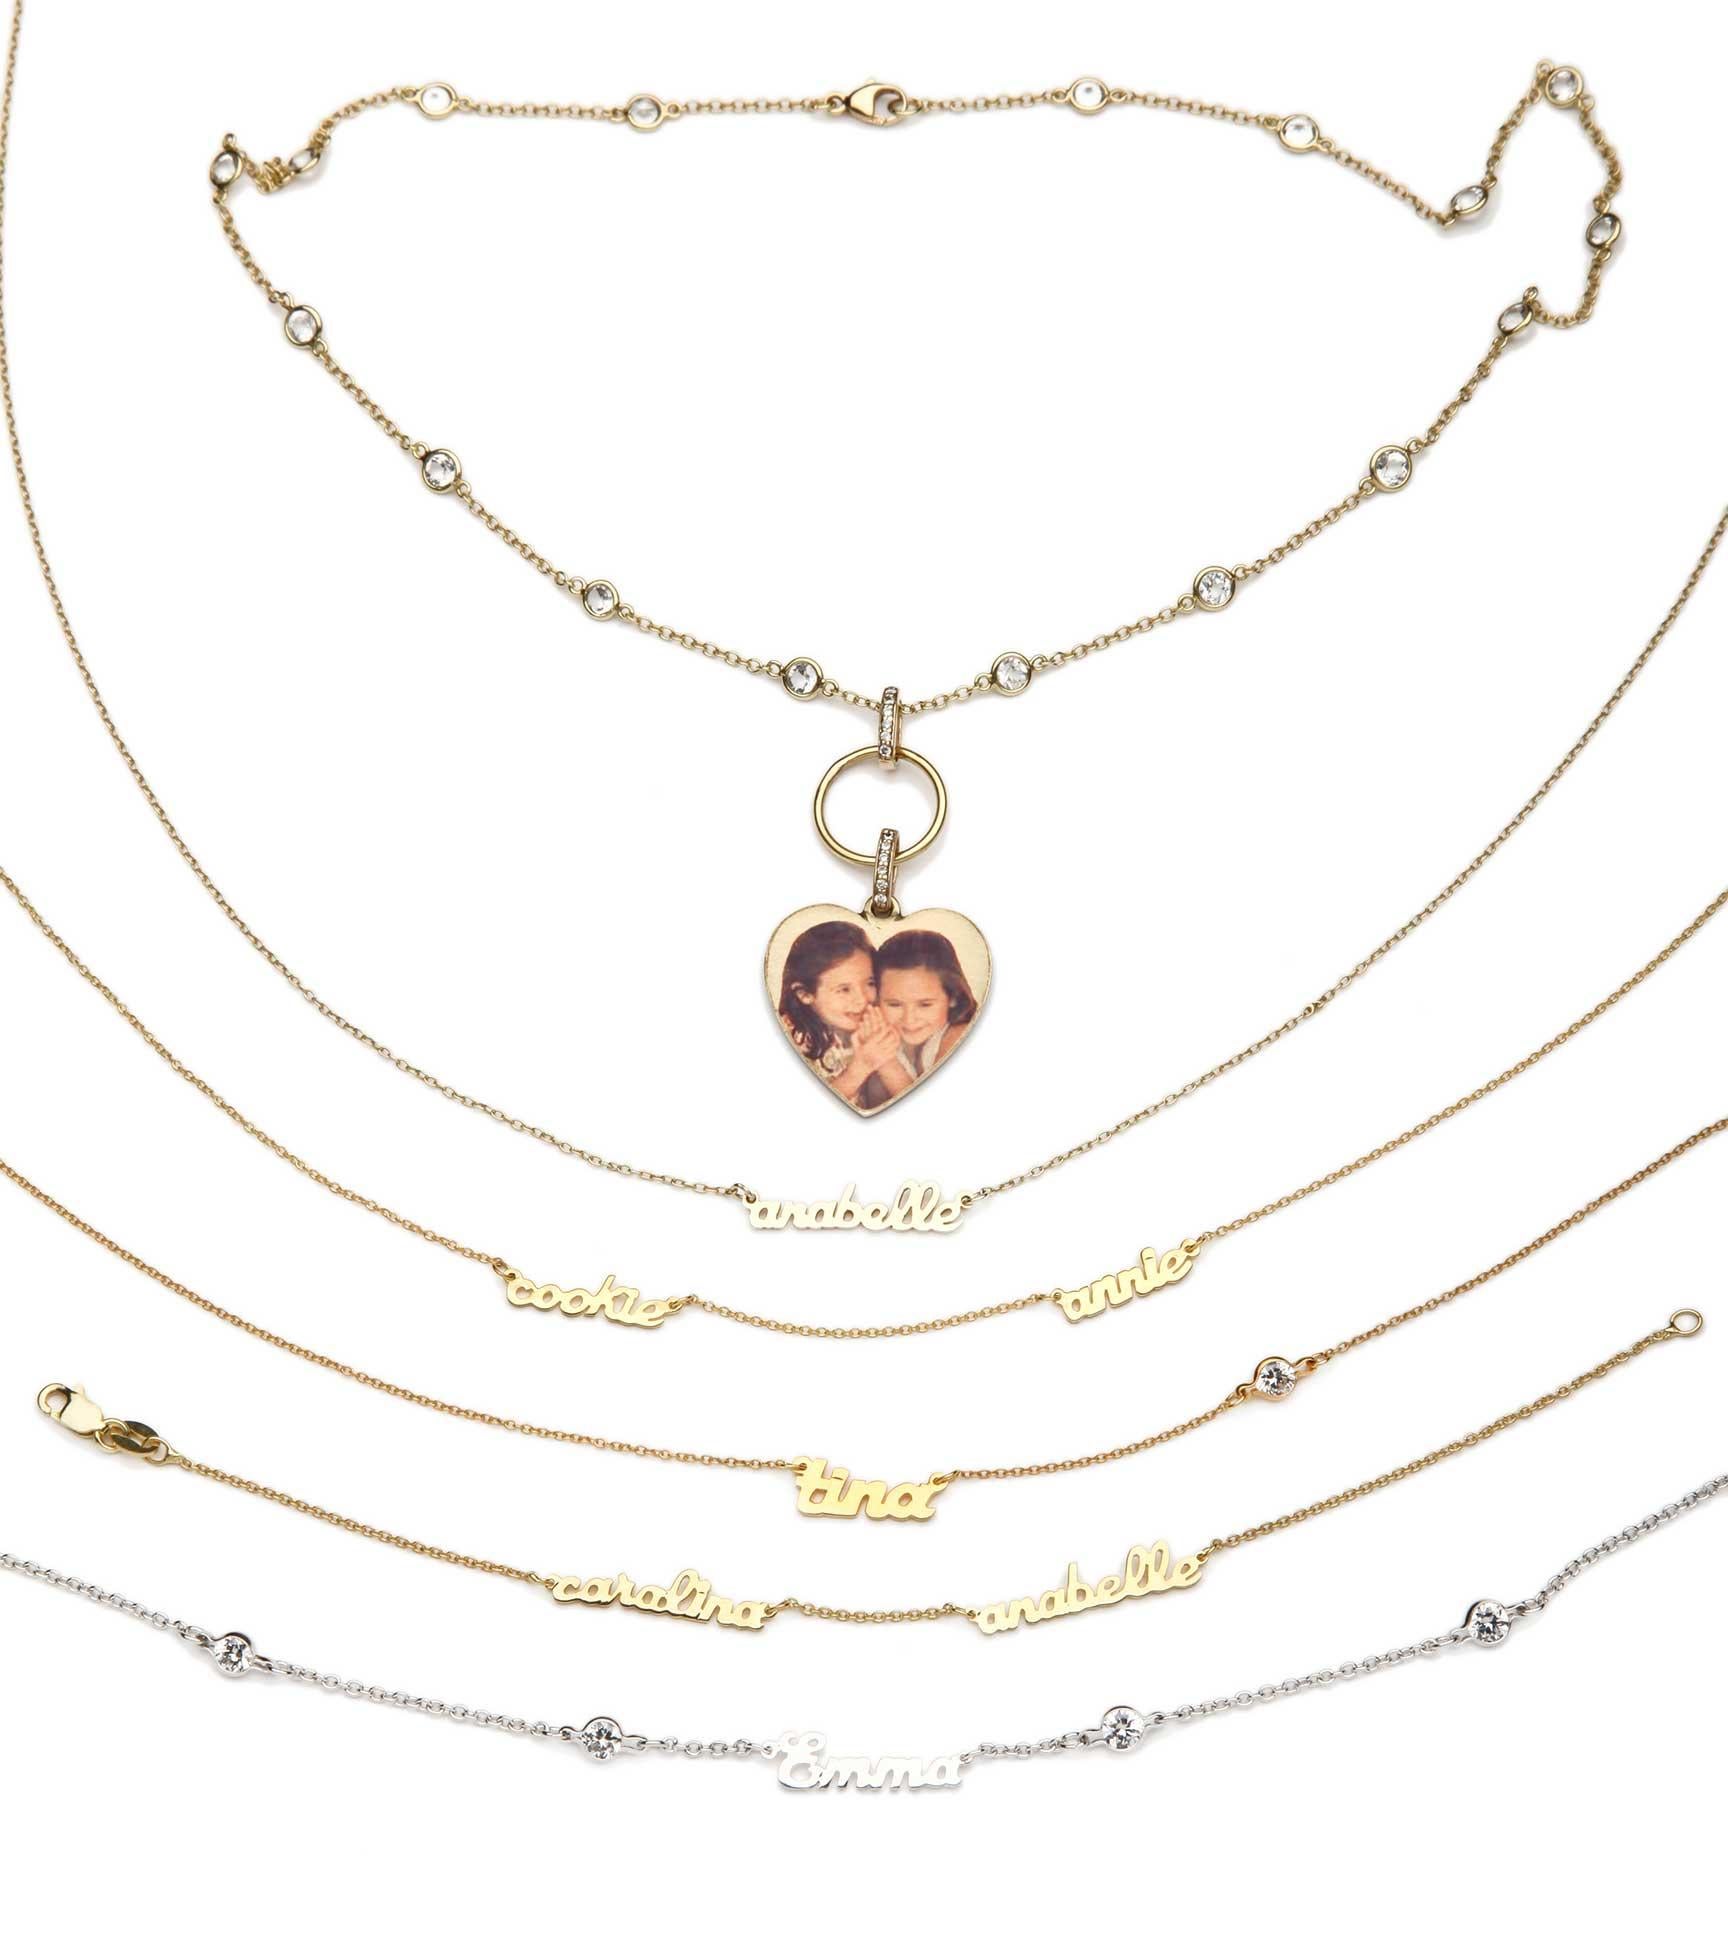 Personalized Mini Script Name Necklace shown and priced with One Name  in Yellow Gold Plate.

The Mini Script collection can be made in Stering silver, Gold plate or 14kt gold.
You may add as many names as you like.

The Mini Script Personalized